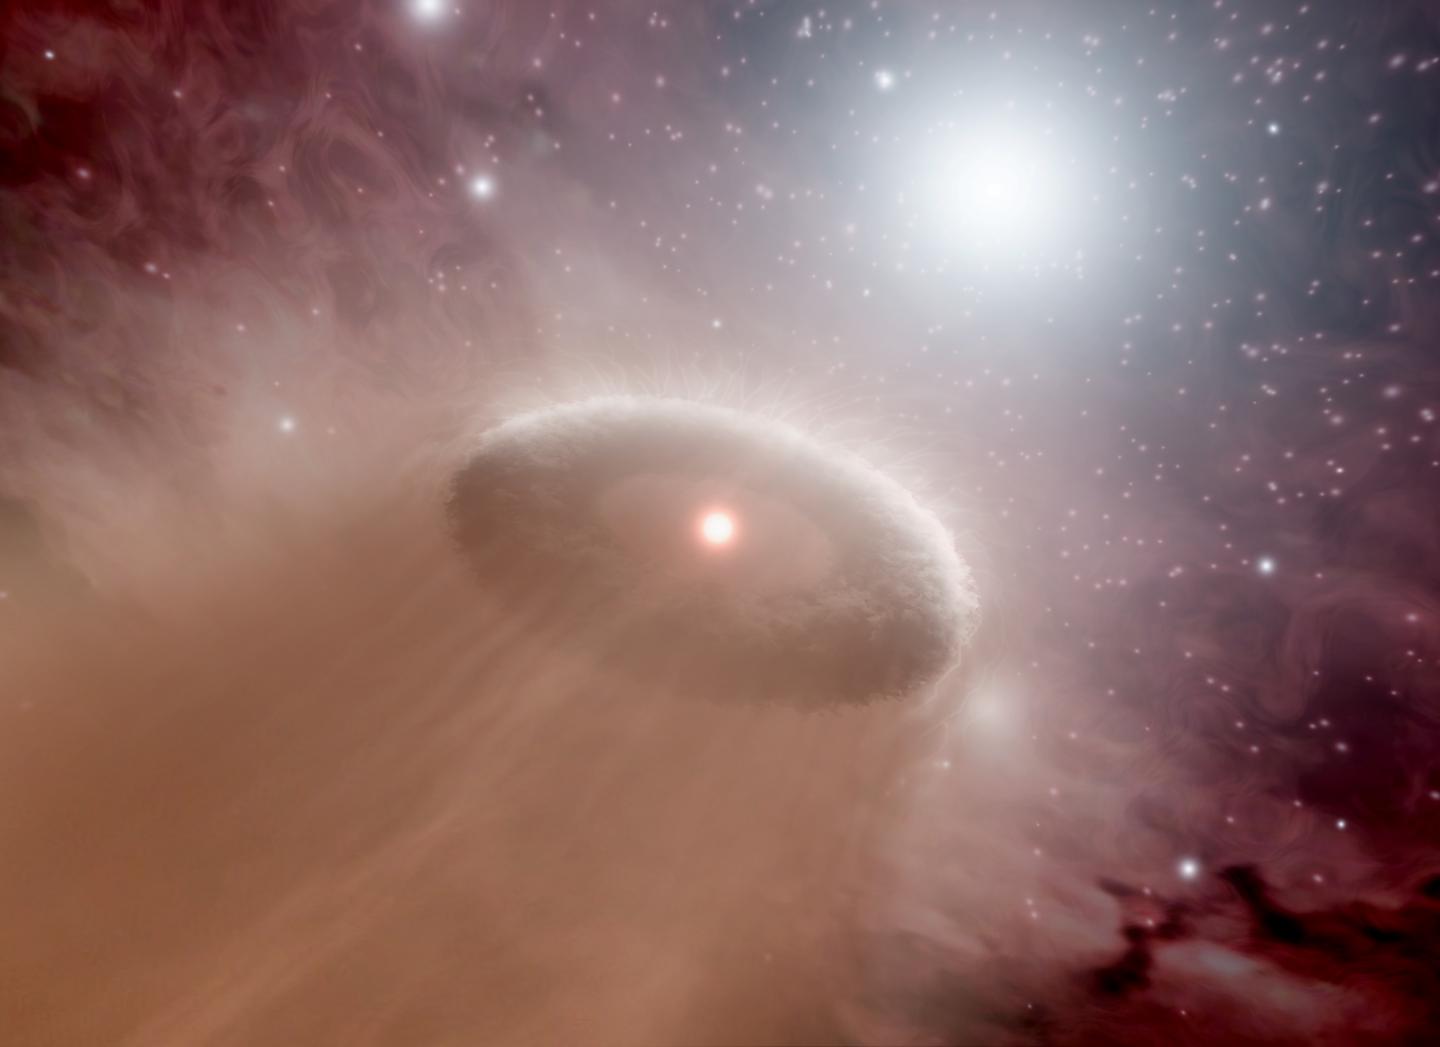 Artist's Impression of An Evaporating Protoplanetary Disc